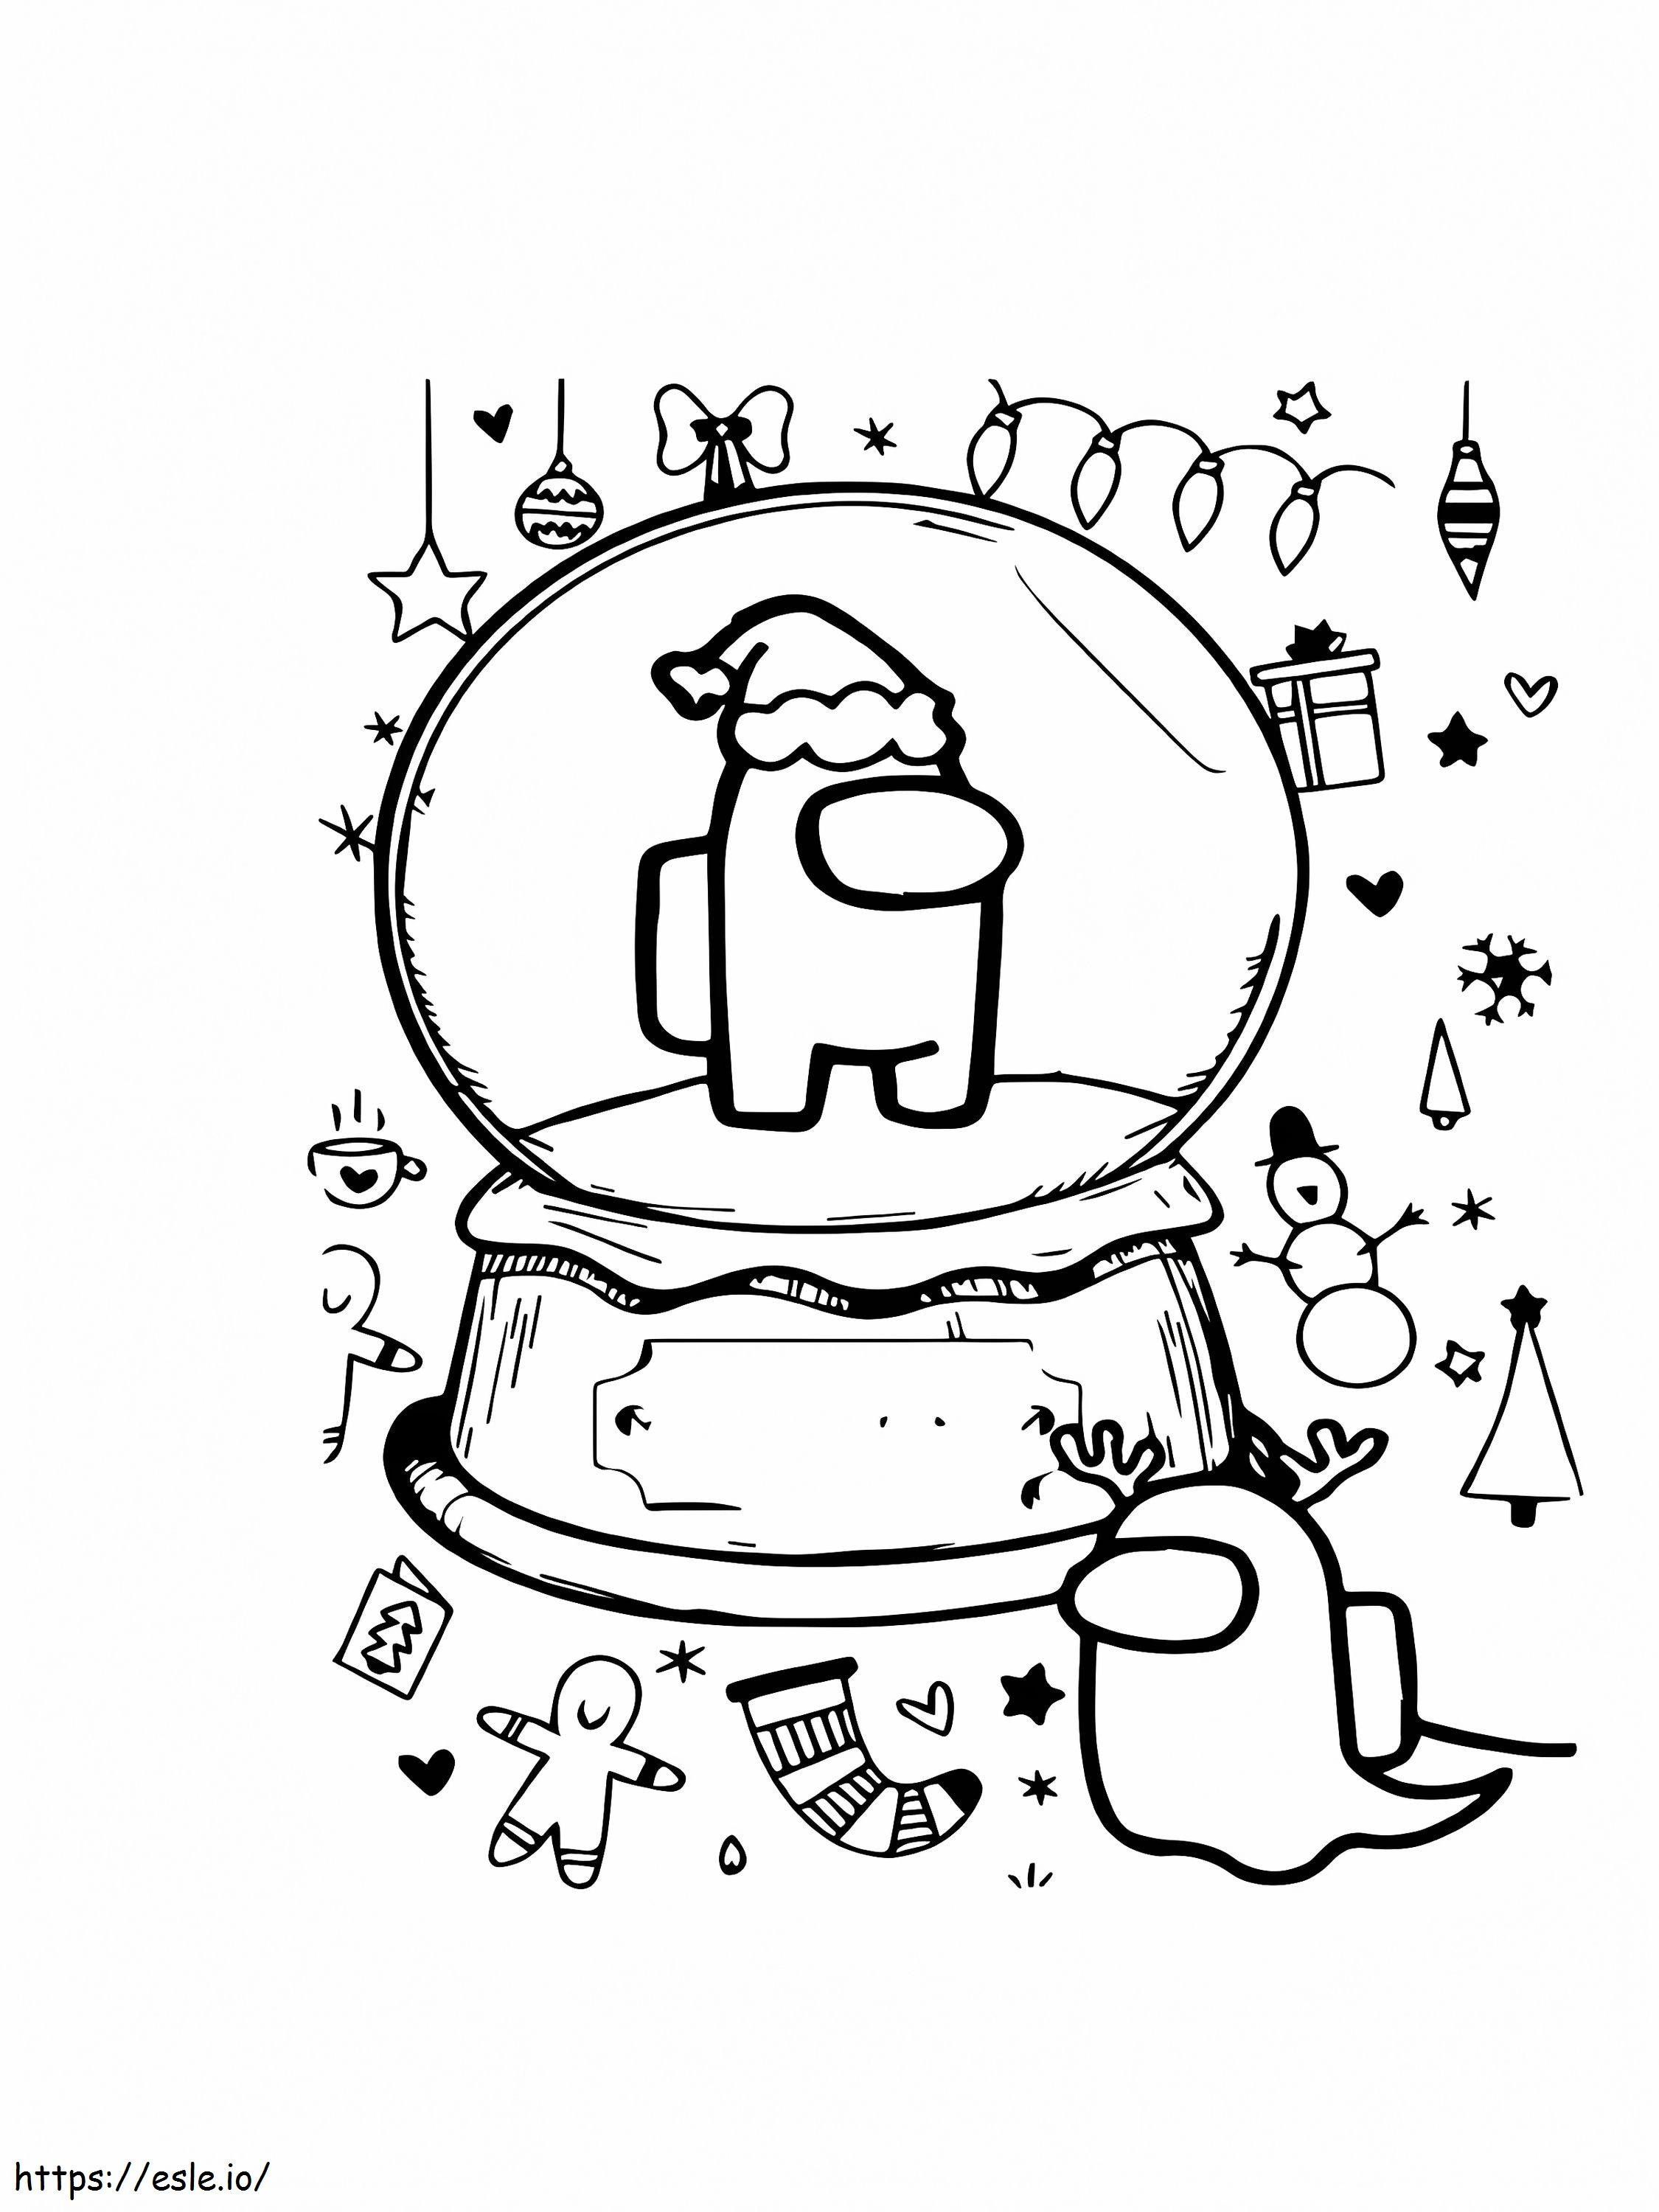 Christmas Candy And Gifts Among Us Coloring Page coloring page